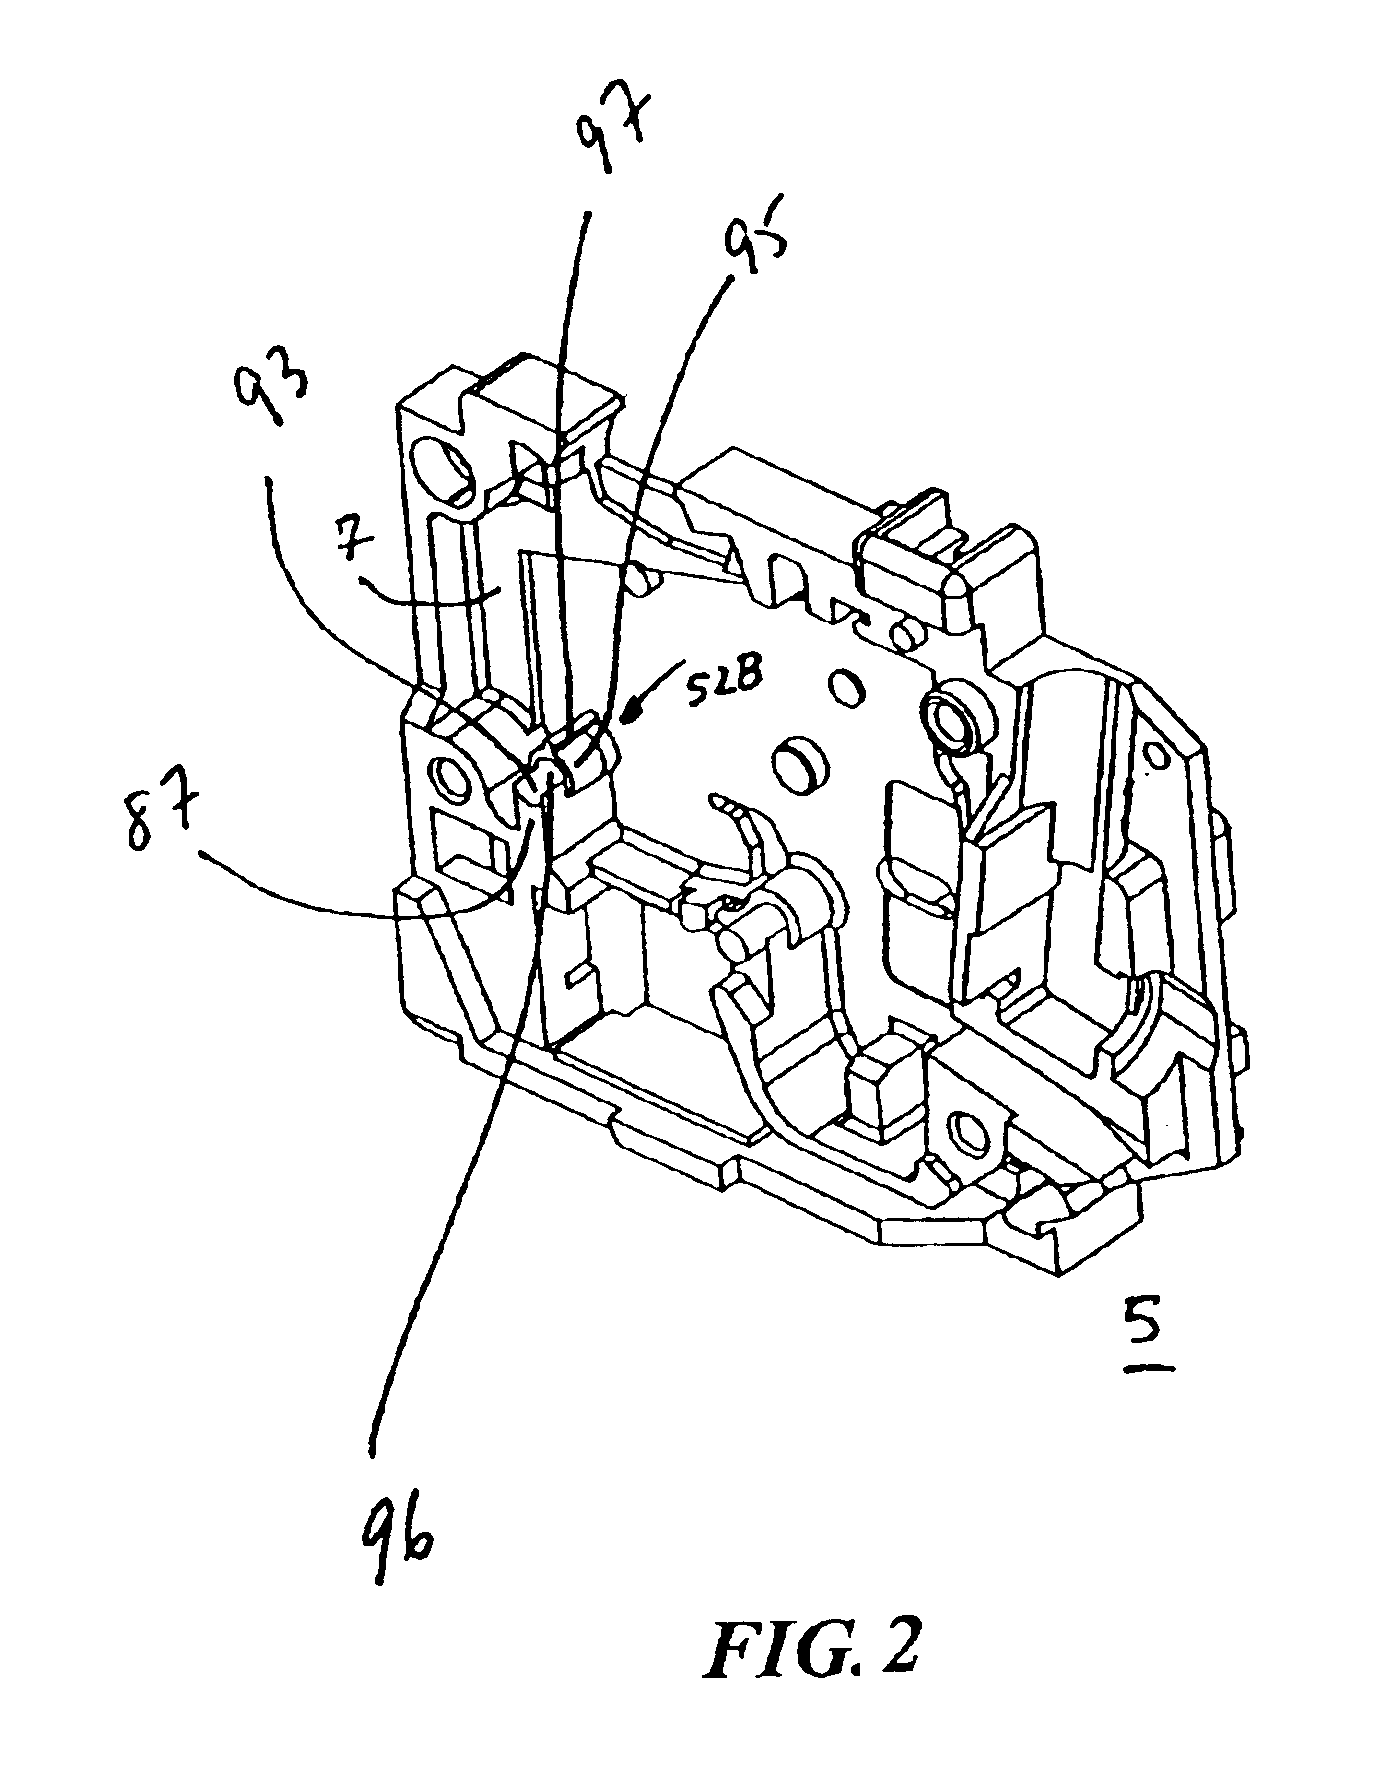 Circuit breaker including a cradle and a pivot pin therefor